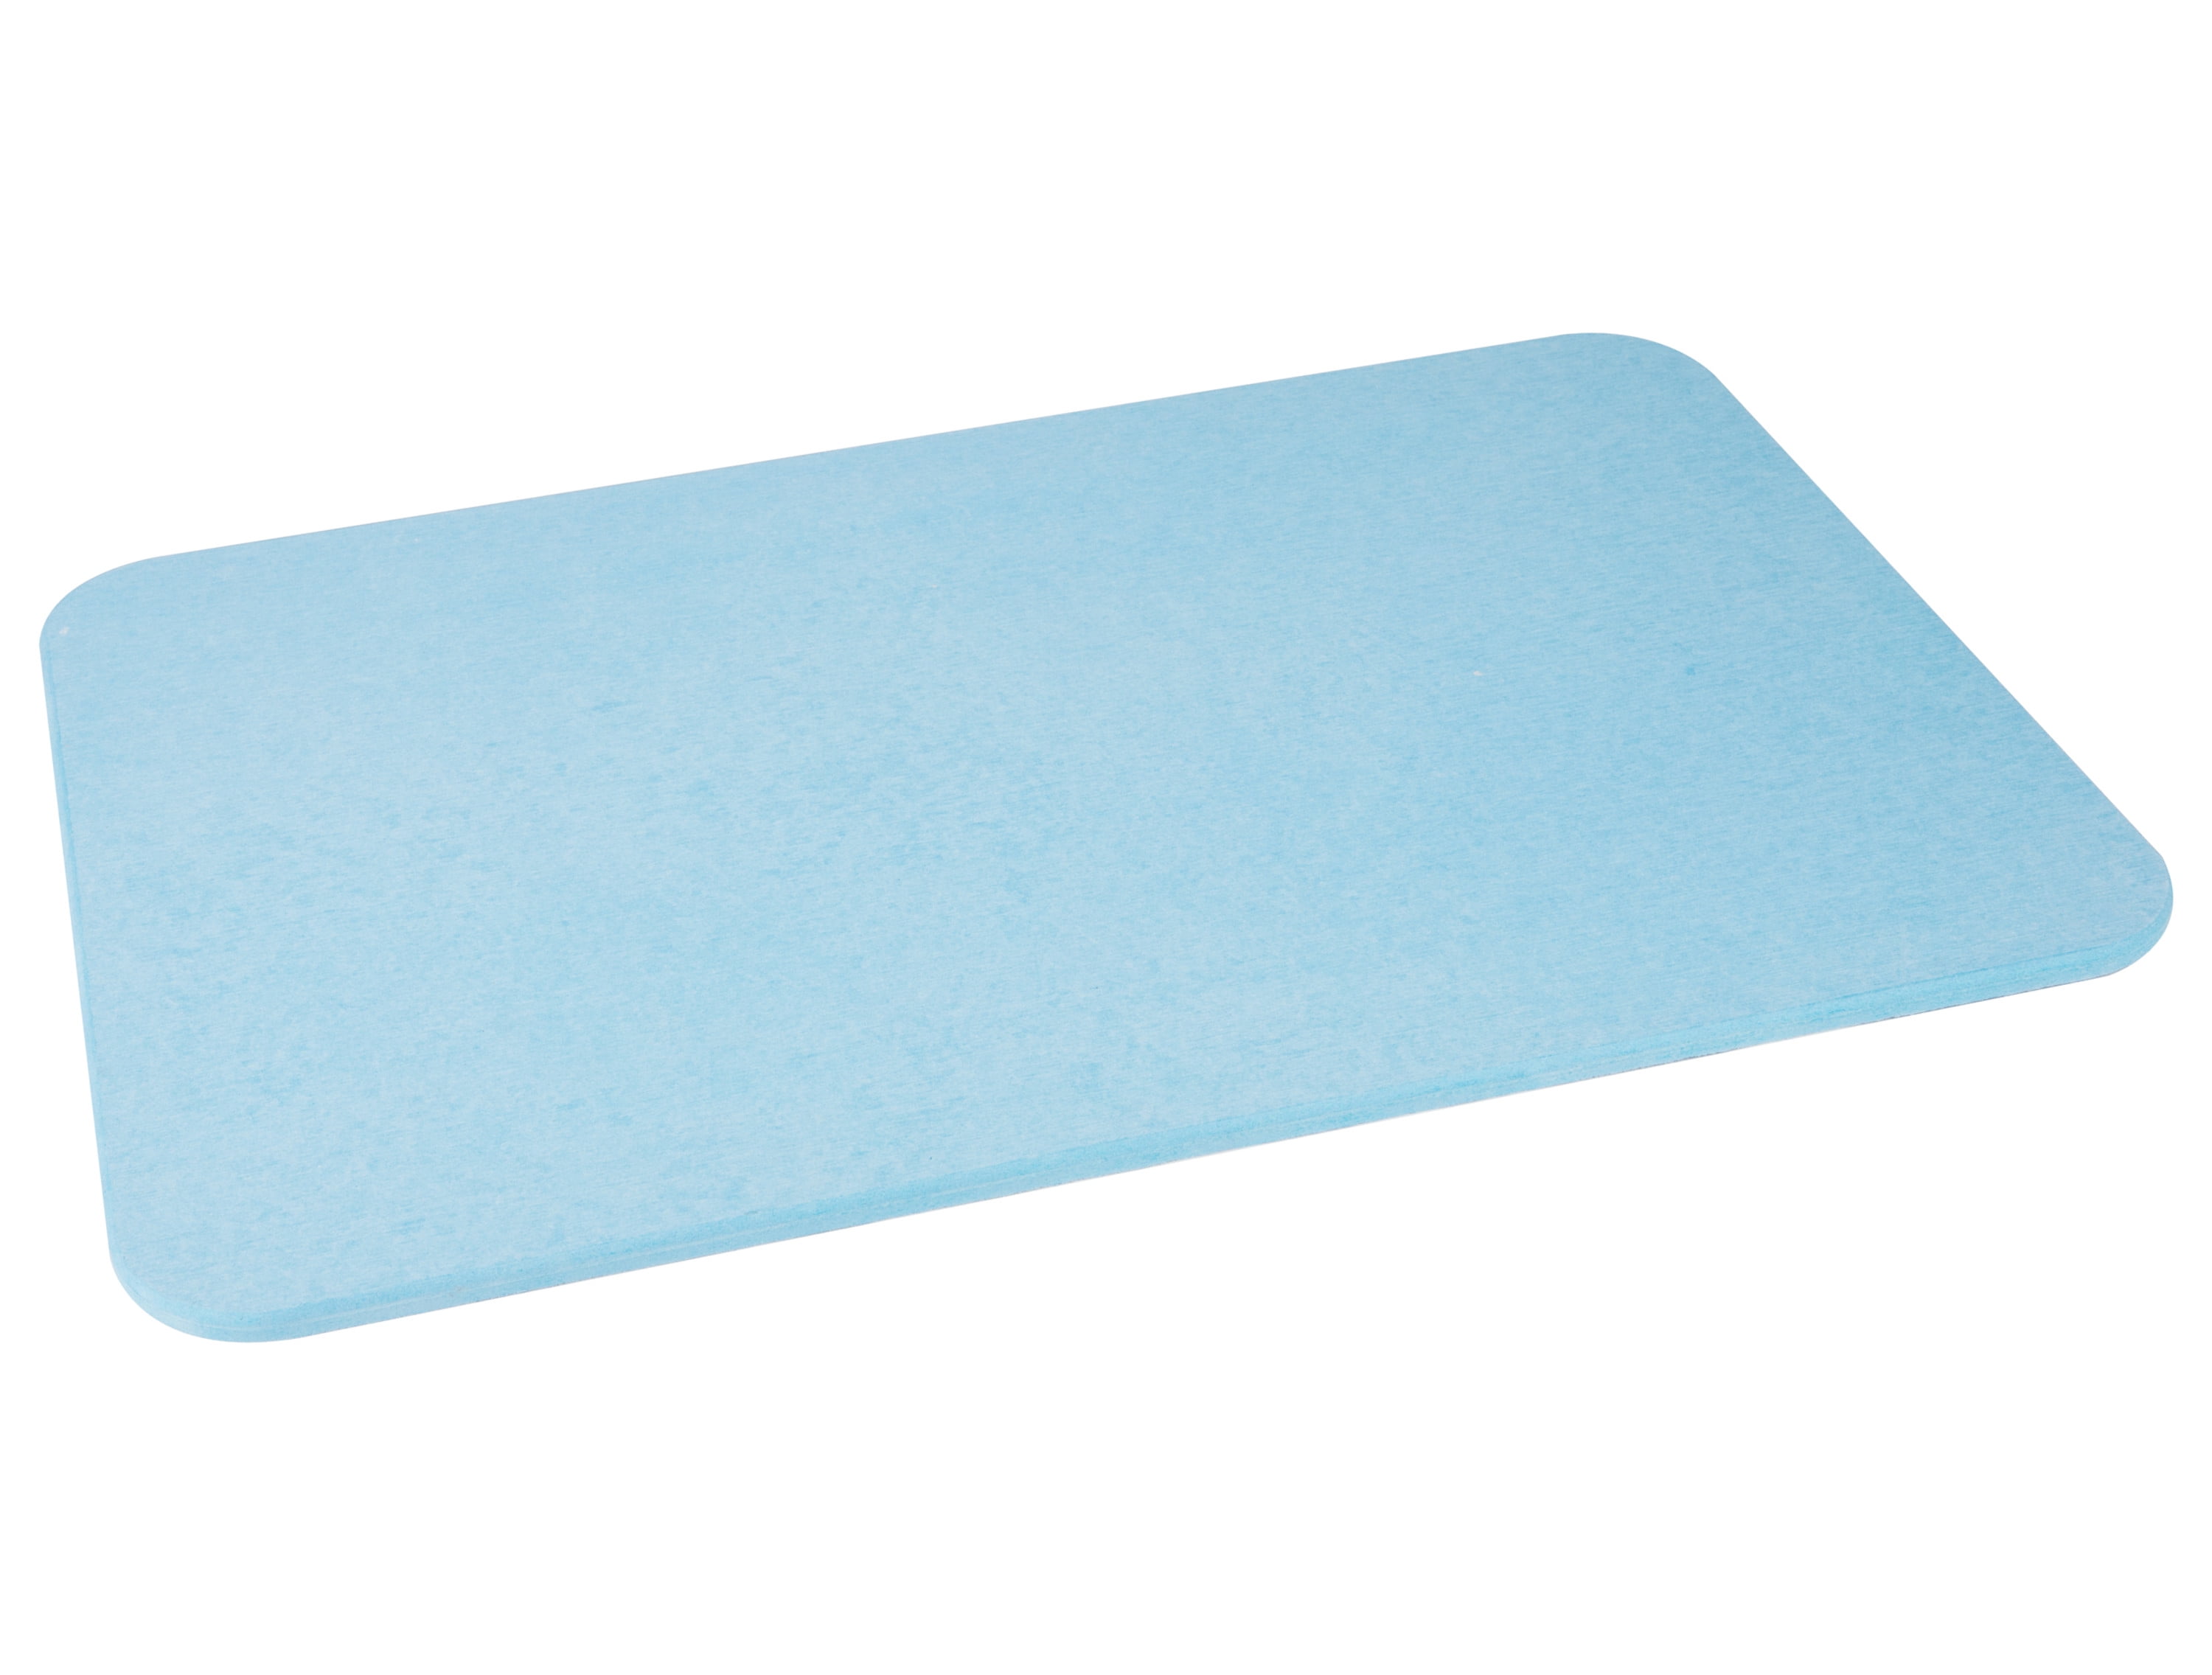 Save on Drive Bath Safety Bath Mat Order Online Delivery